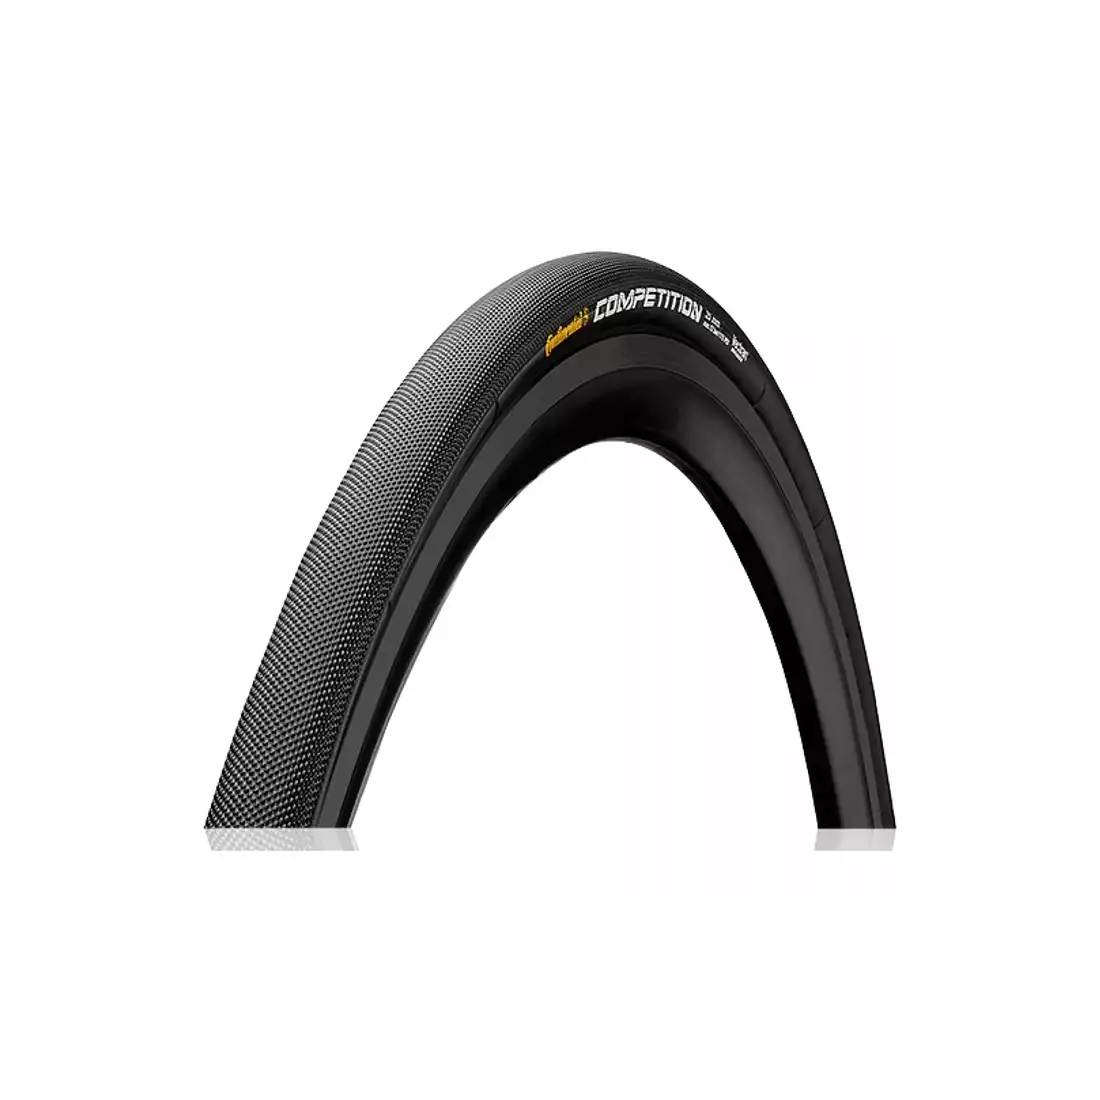 CONTINENTAL competition road bicycle tire, 28x22 tubular